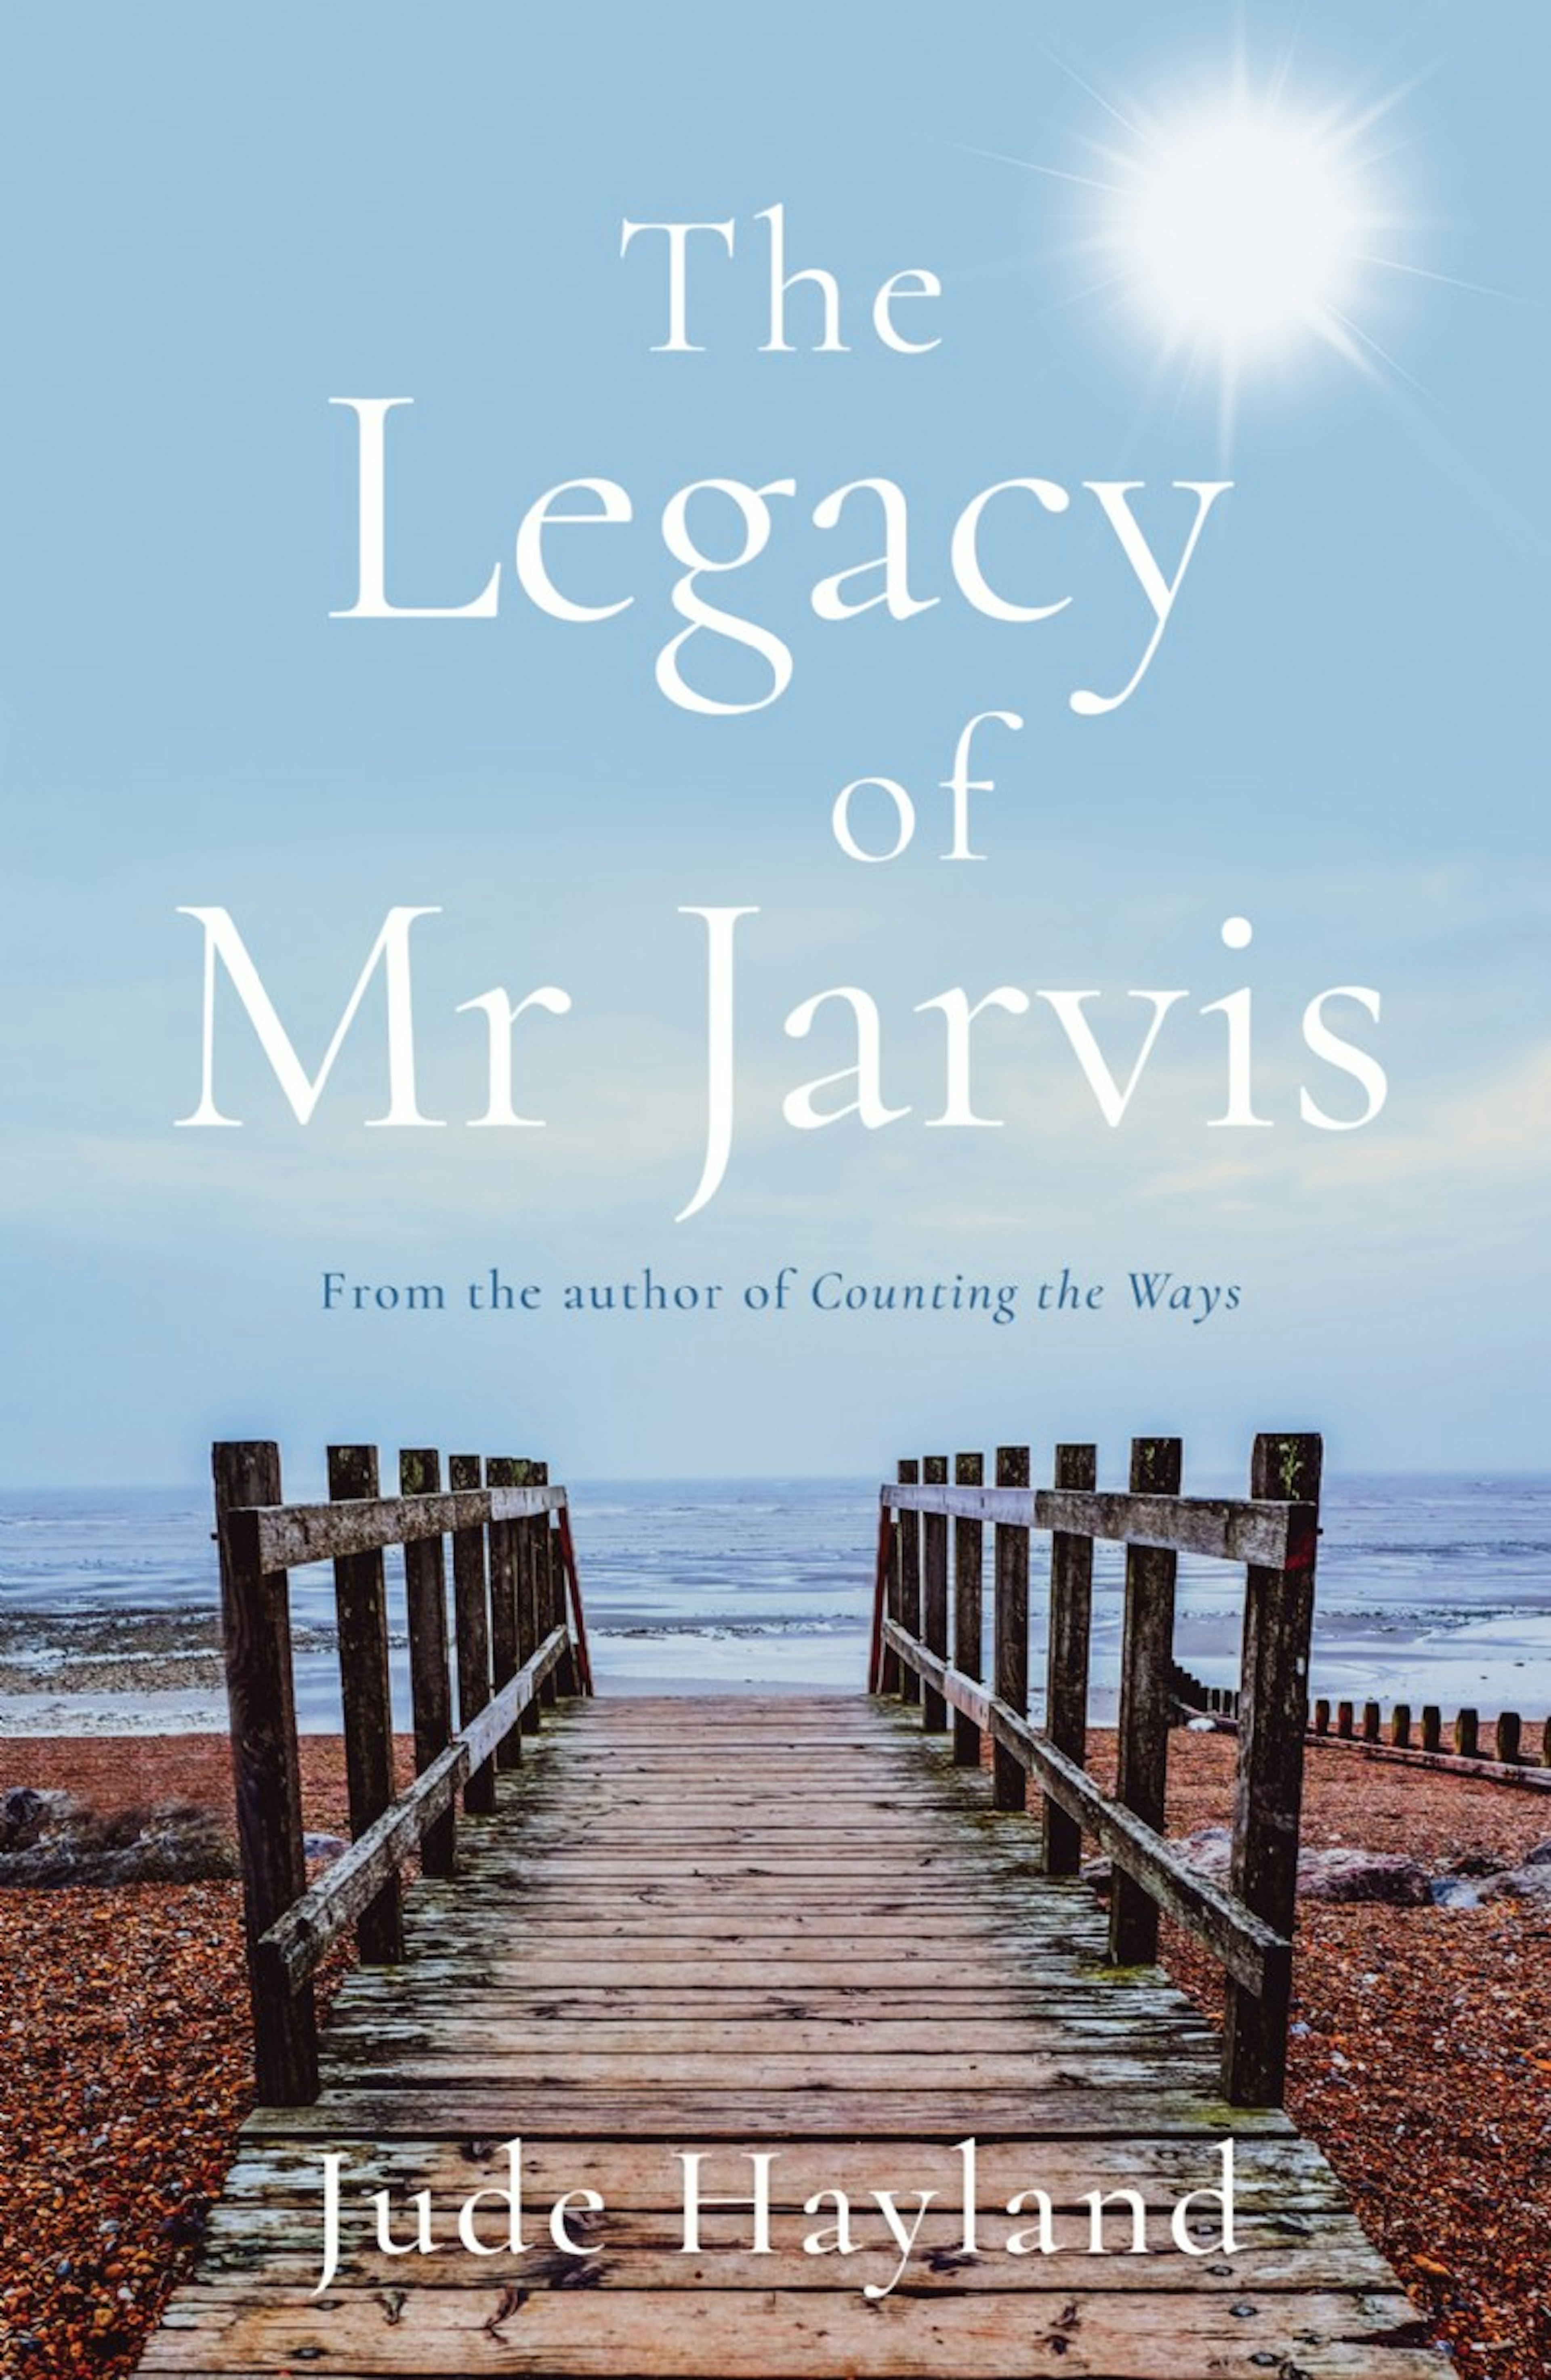 The Legacy of Mr Jarvis